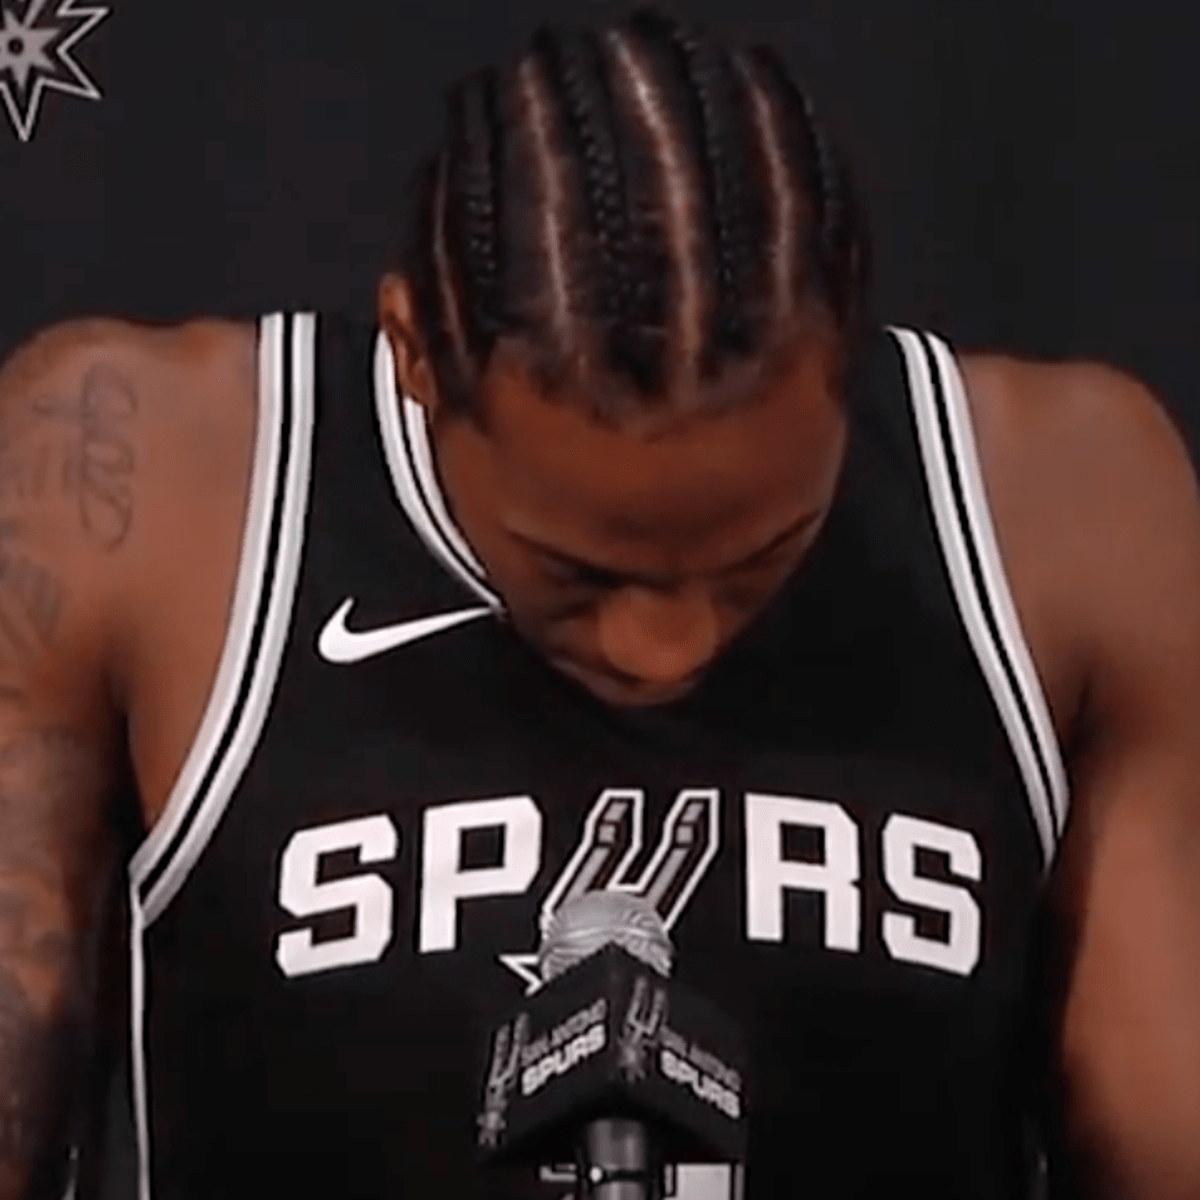 Report: Relations may be strained between Spurs, Kawhi Leonard